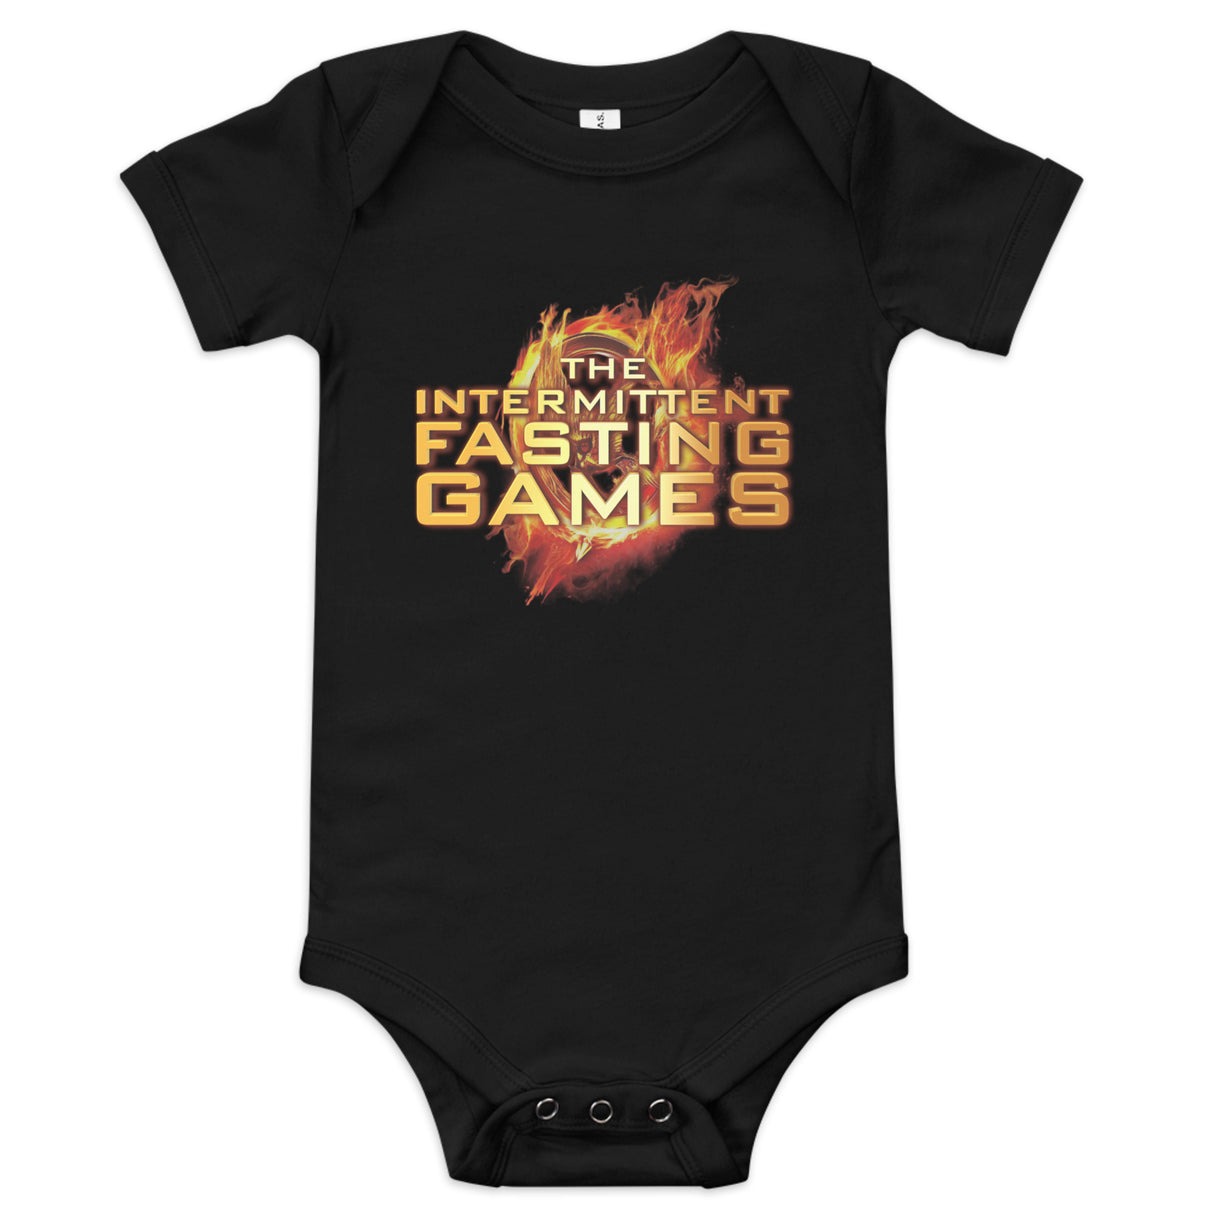 The Intermittent Fasting Games Baby Onesie